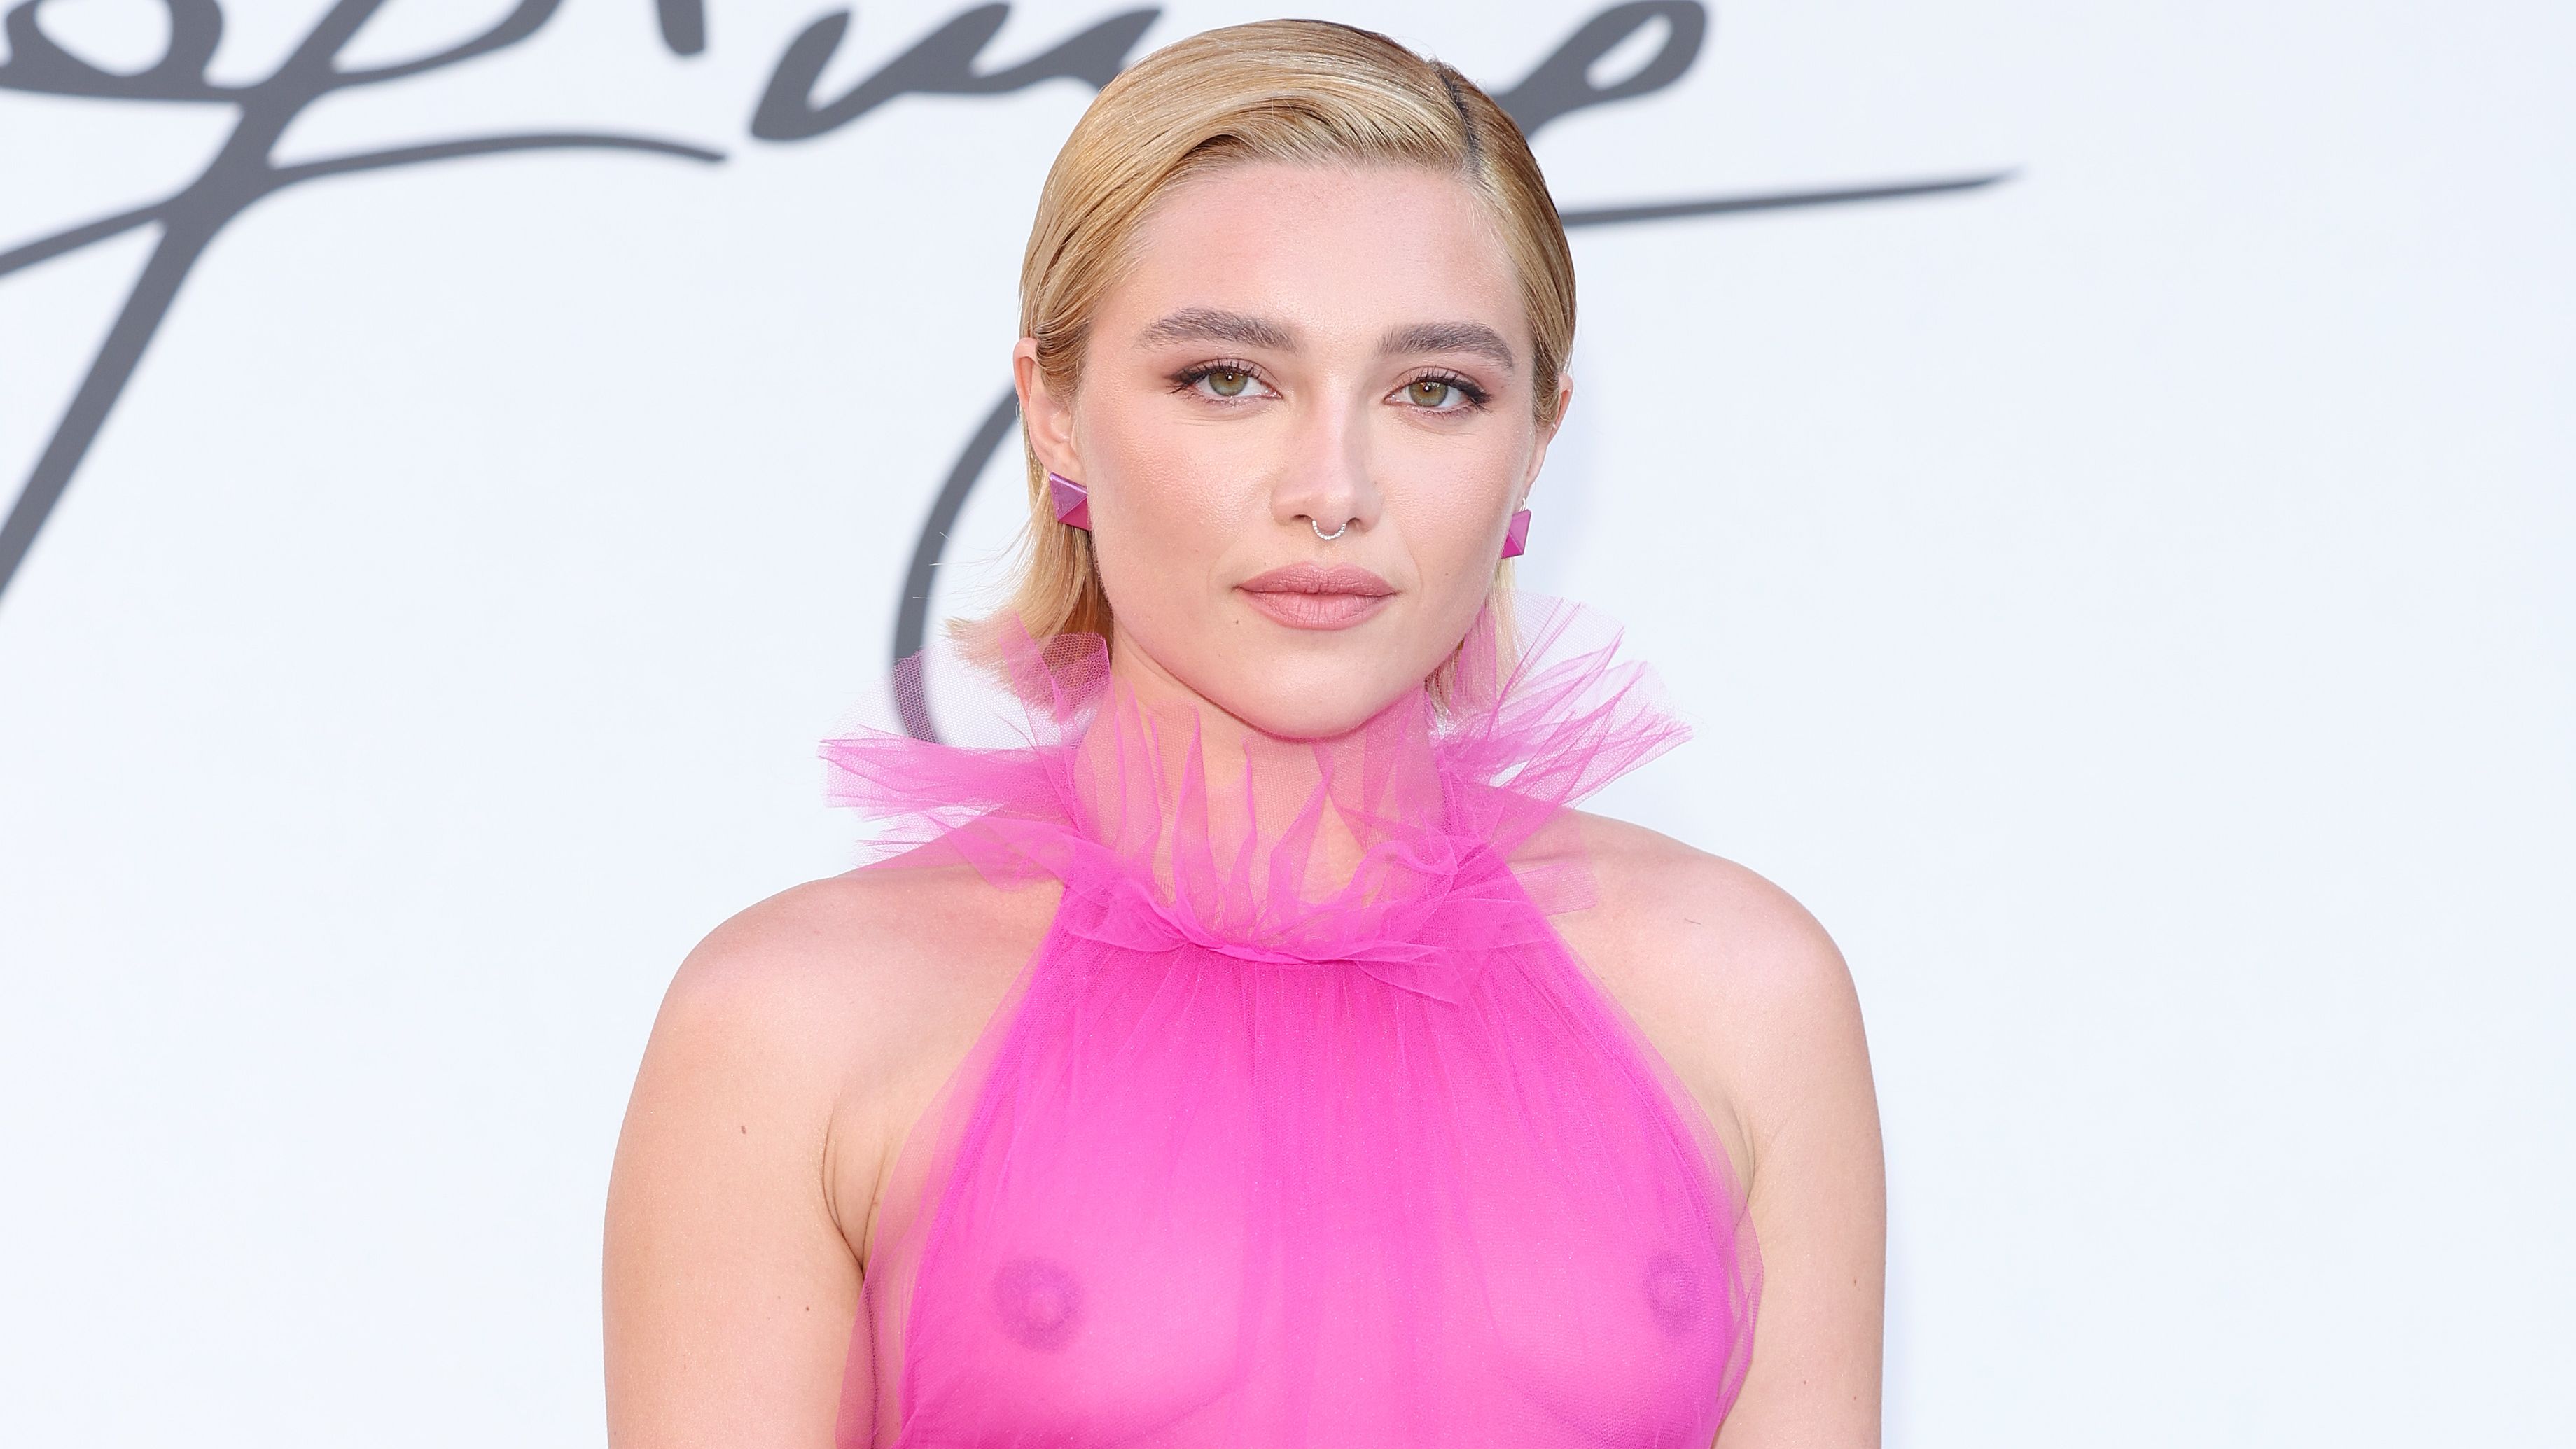 anthony cuffee recommends Florence Pugh Boobs